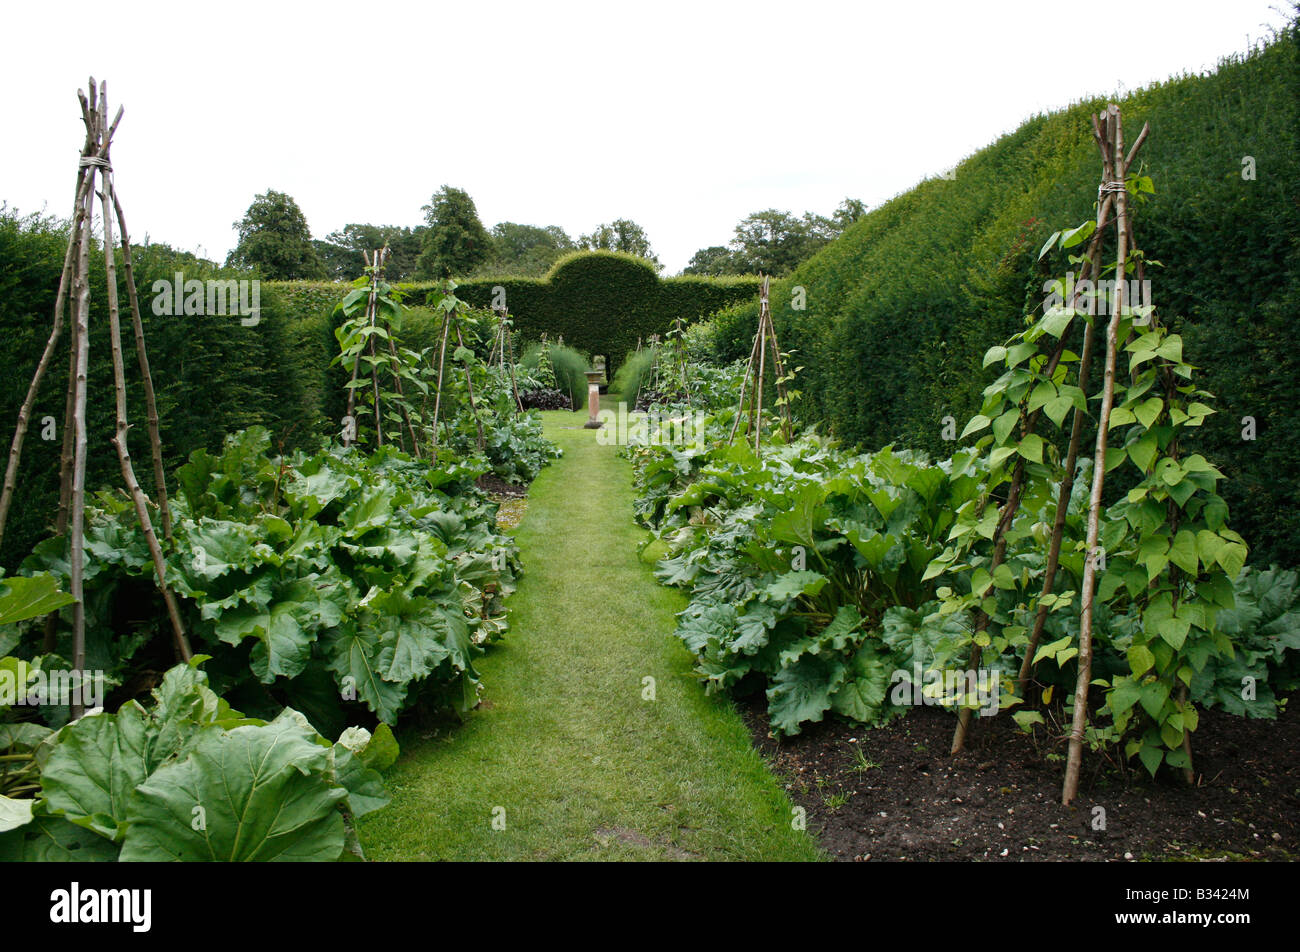 Runner Beans growing up a wig wam support in the vegetable garden at Levens Hall, The Lake District, UK Stock Photo